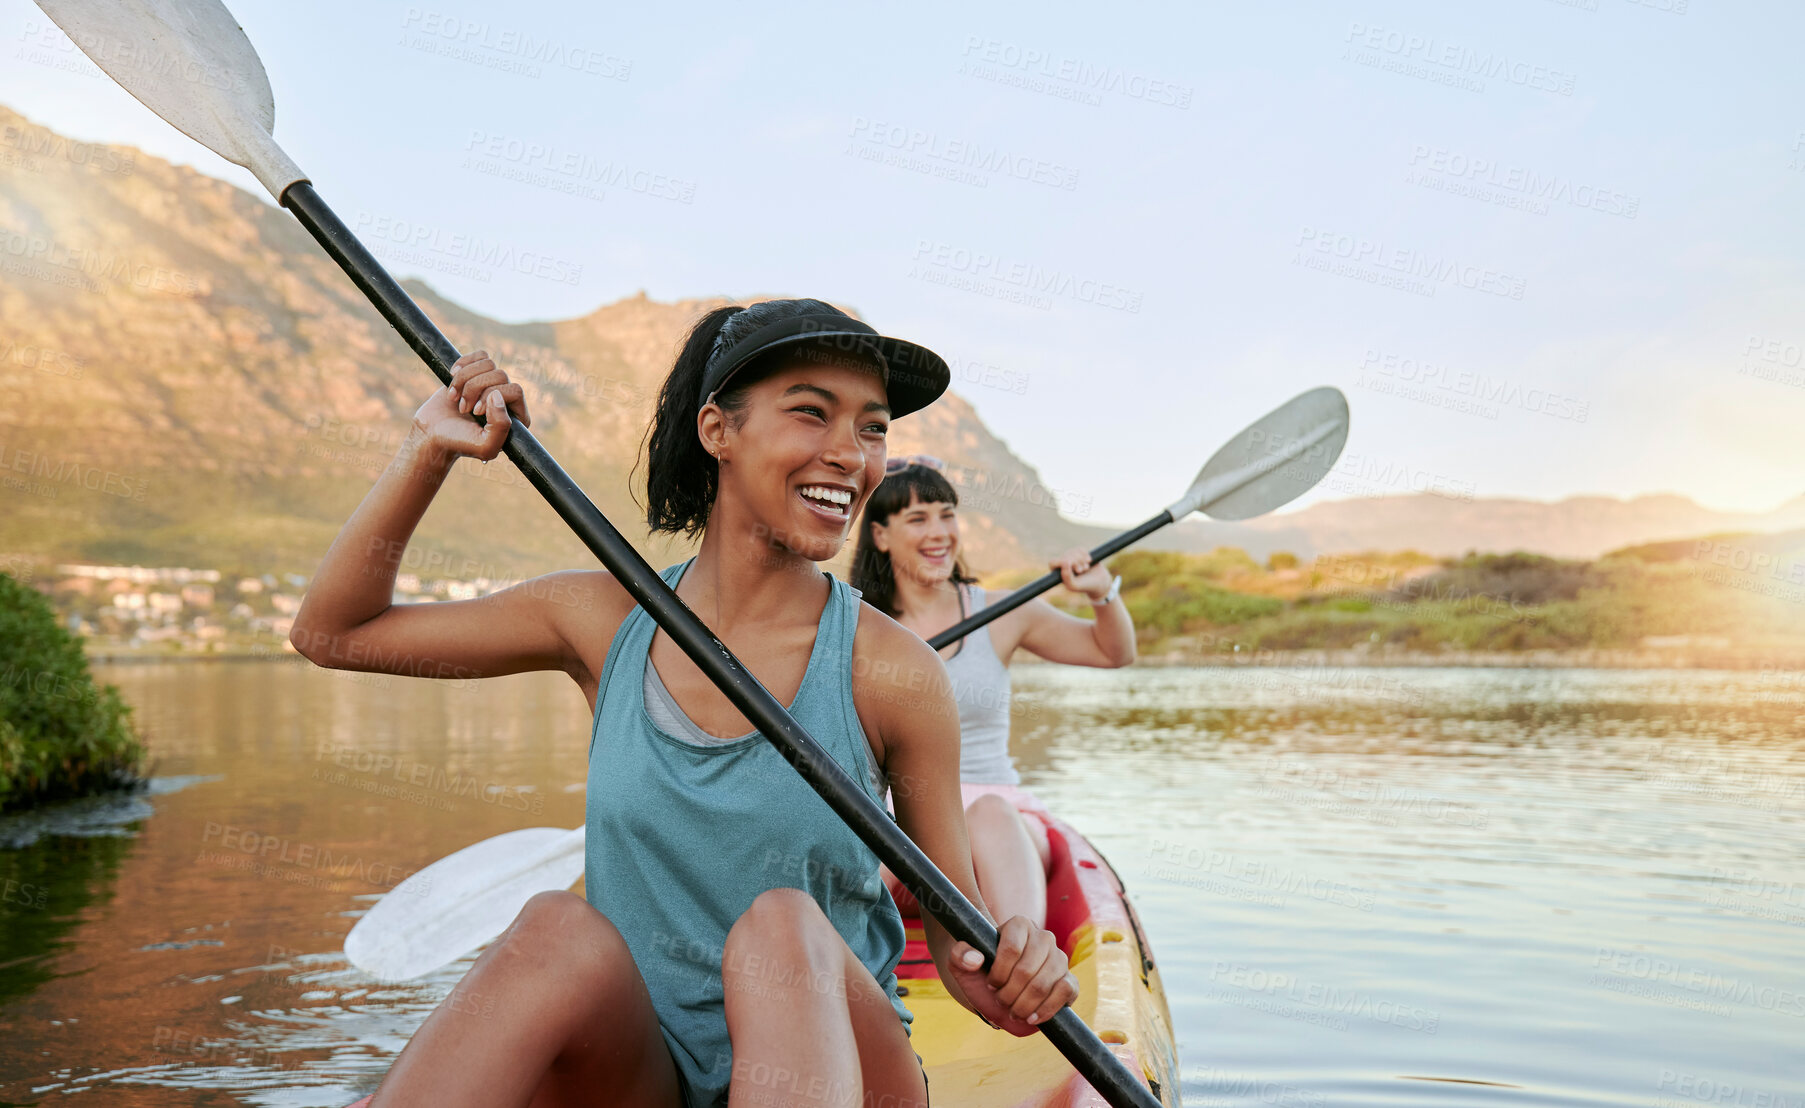 Buy stock photo Two smiling friends kayaking on a lake together during summer break. Smiling and happy playful women bonding outside in nature with water activity. Having fun on a kayak during weekend recreation